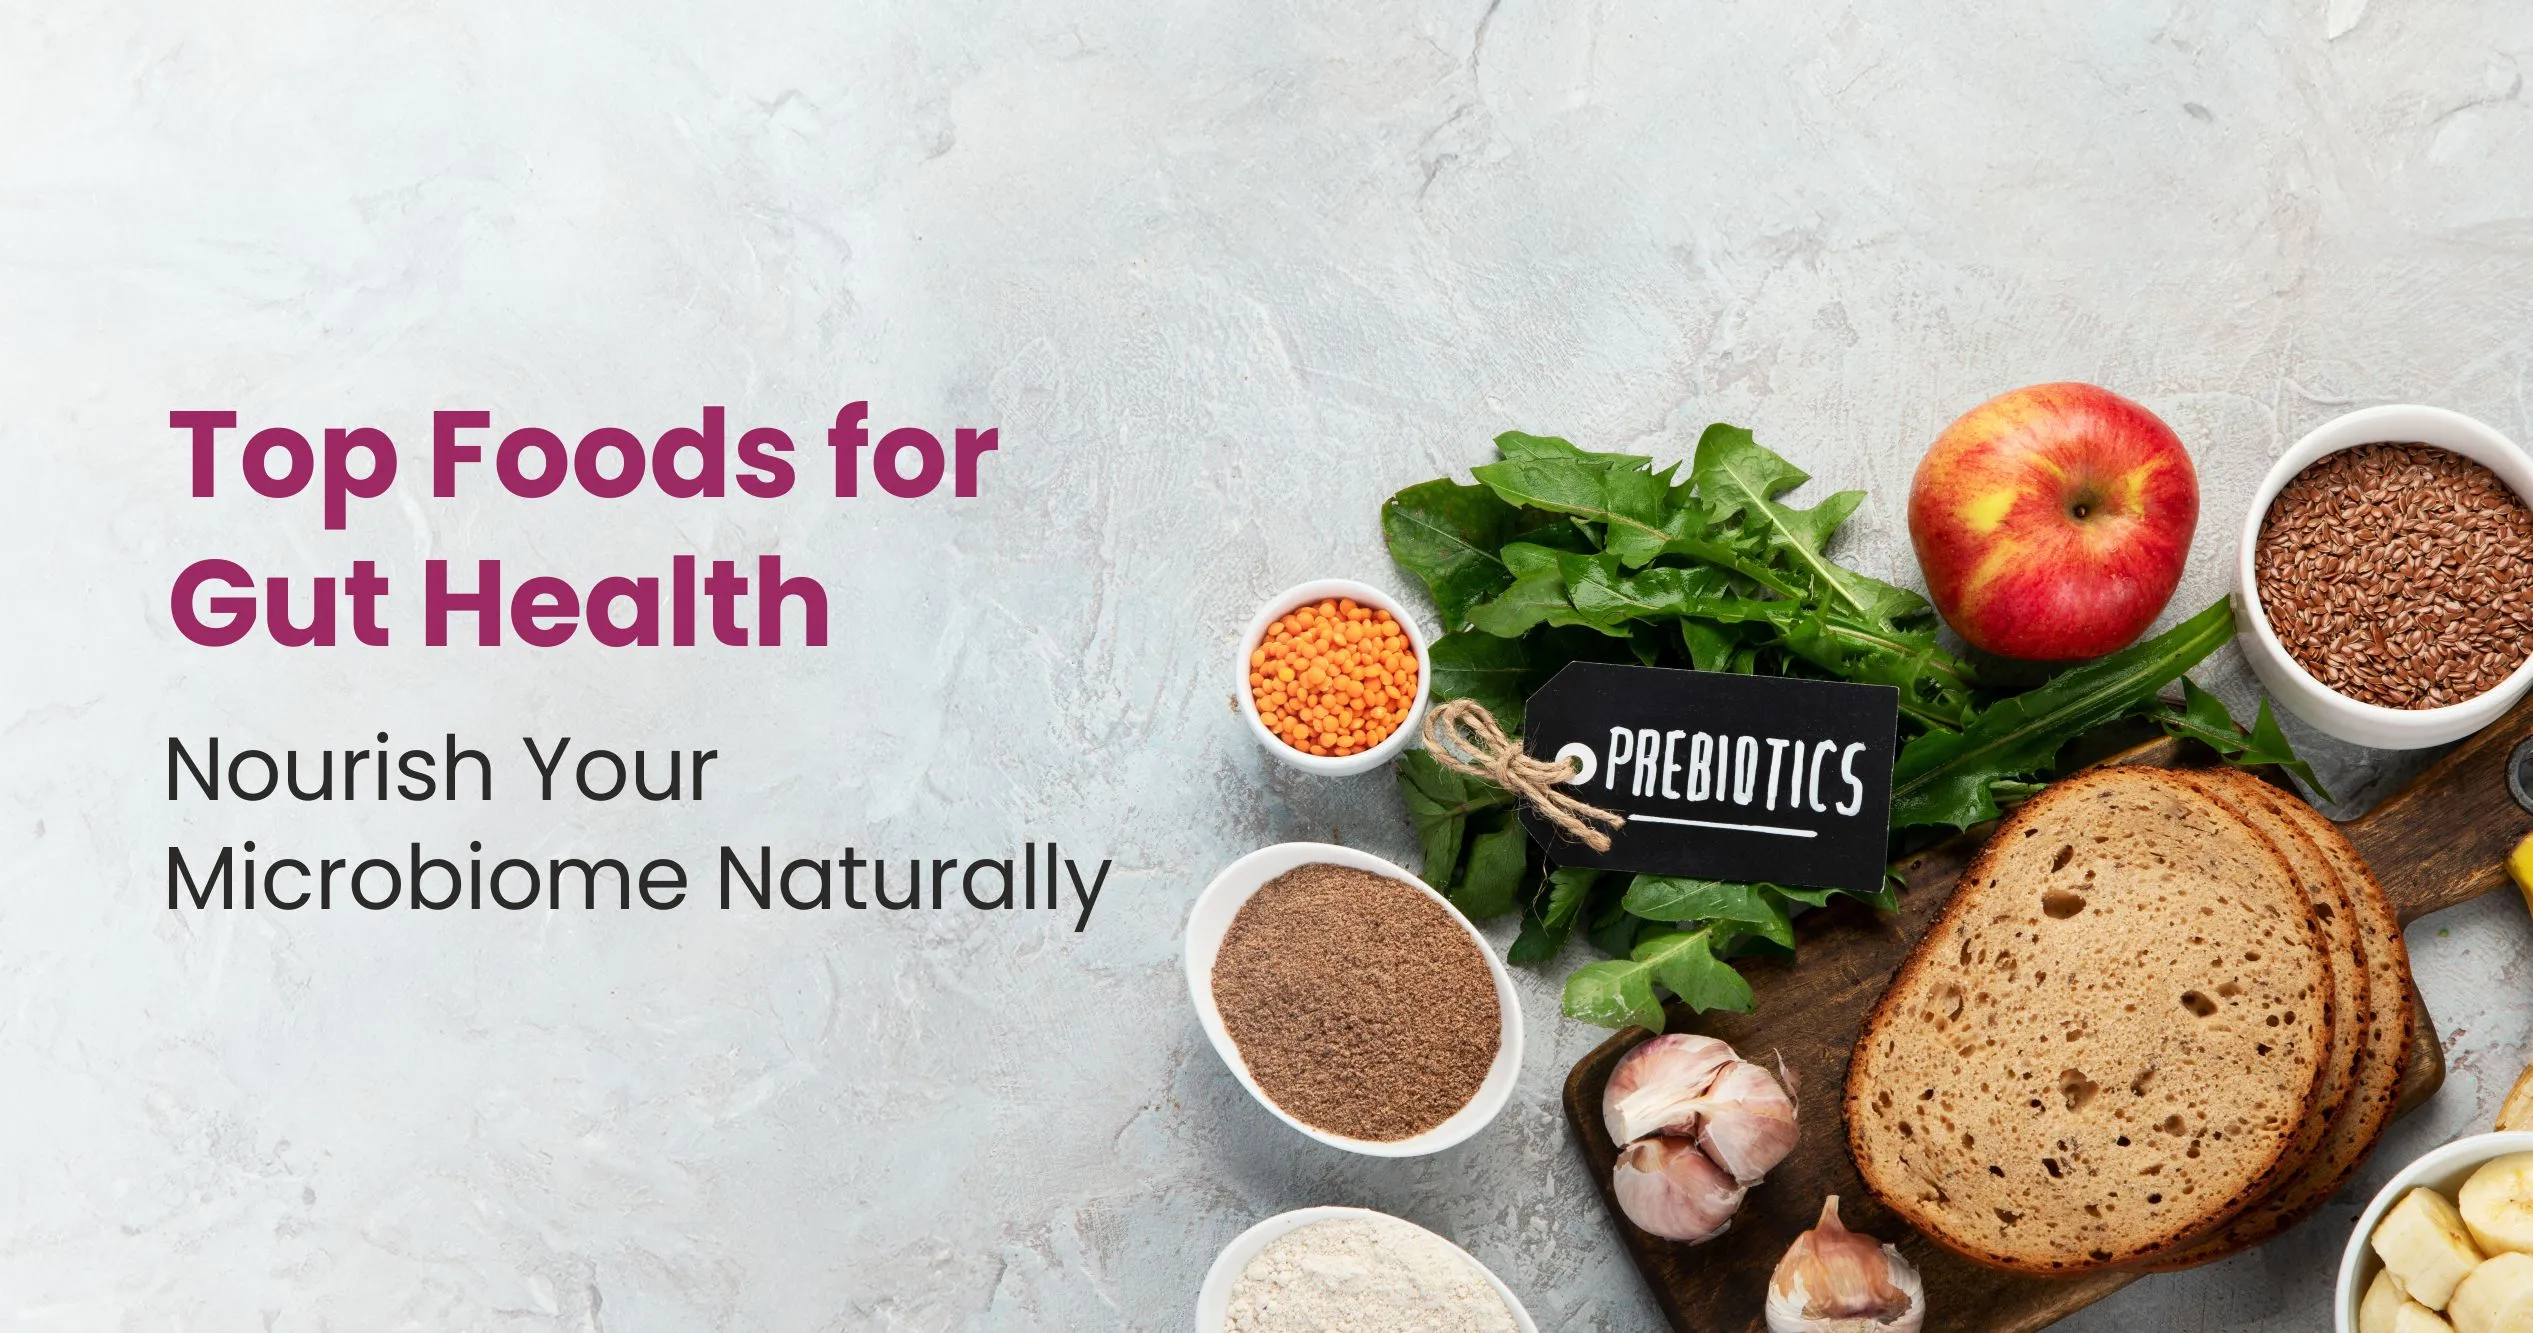 Top Foods for Gut Health: Nourish Your Microbiome Naturally